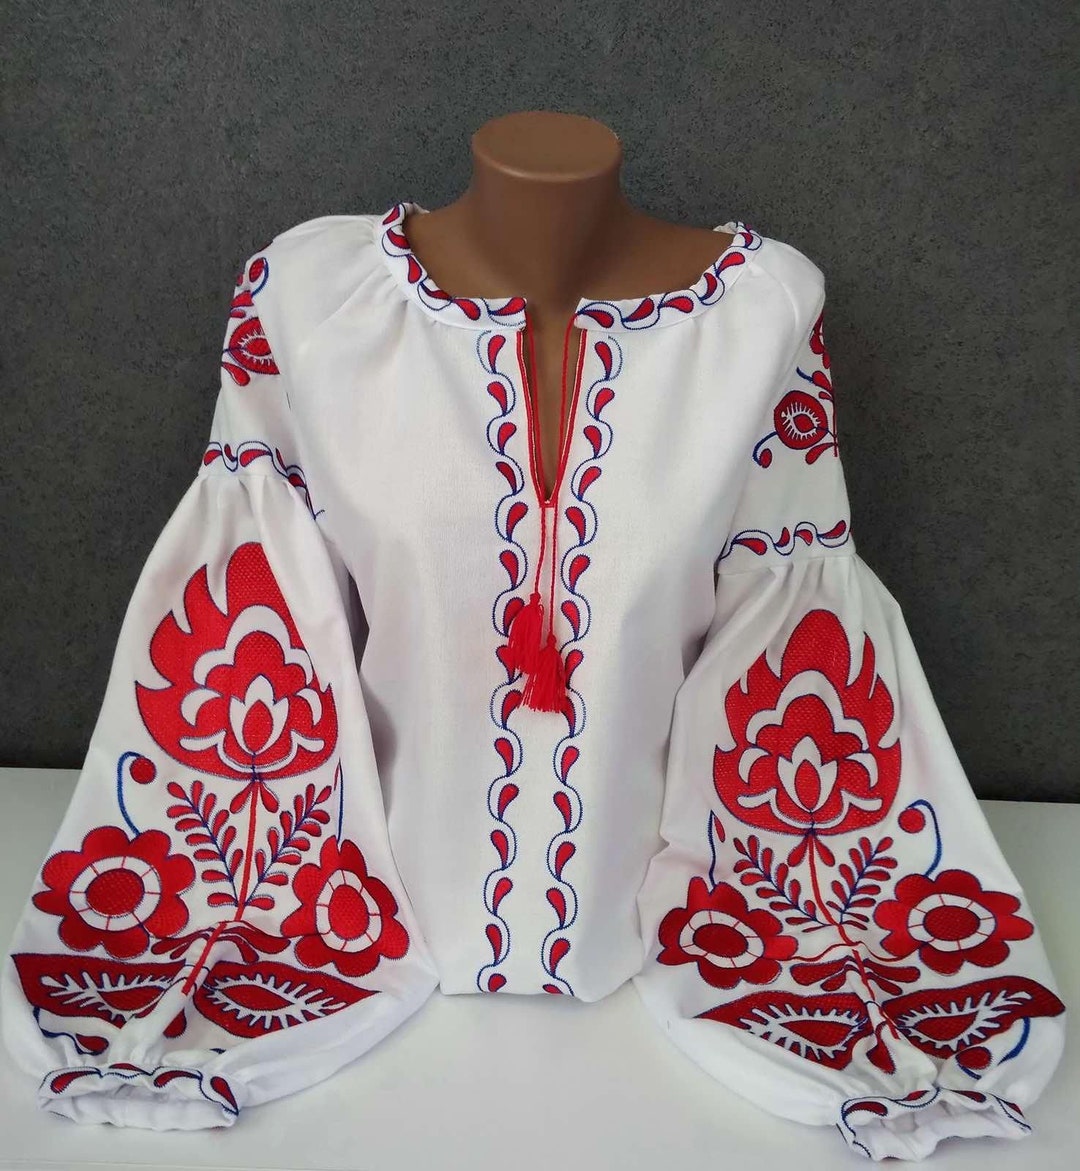 White Embroidered Blouse With Floral Pattern Cotton Shirt With - Etsy